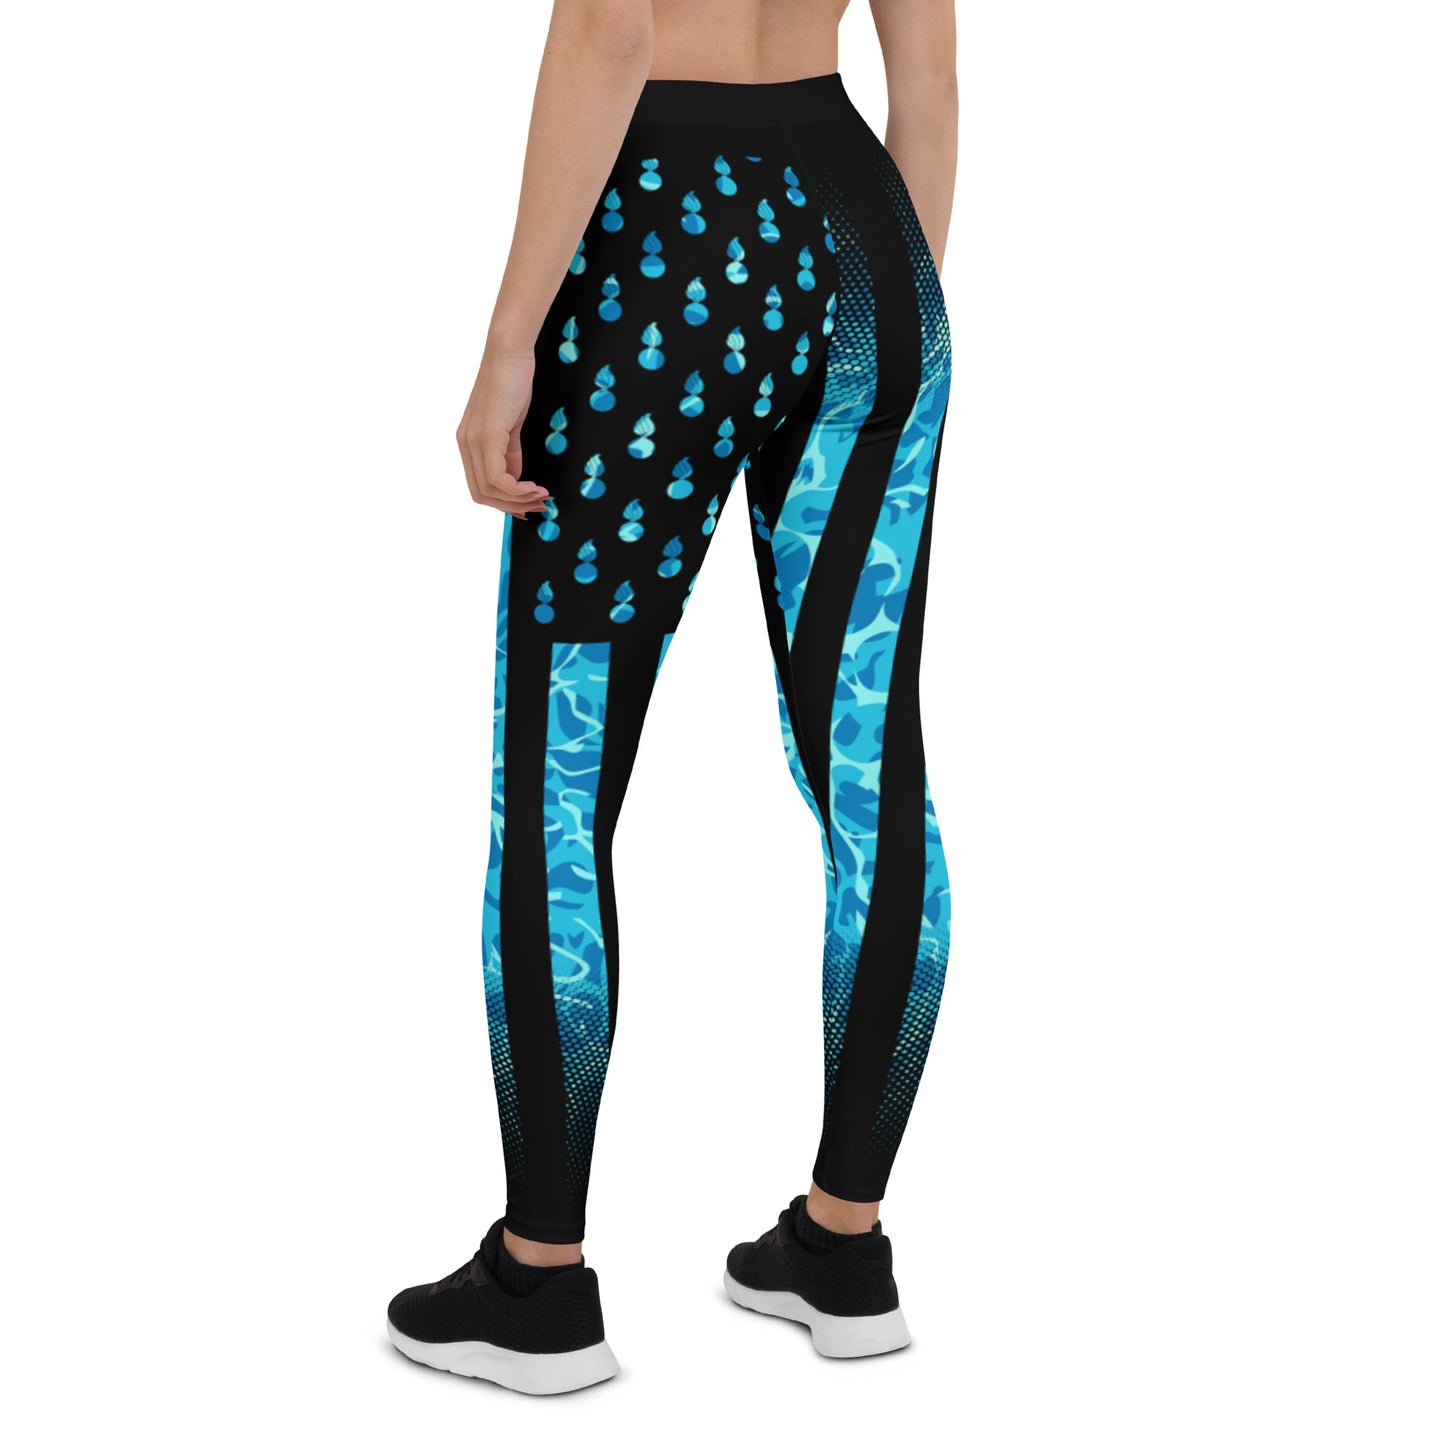 AMMO Black American Flag With Pisspots For Stars Above Under Water Pattern Leggings